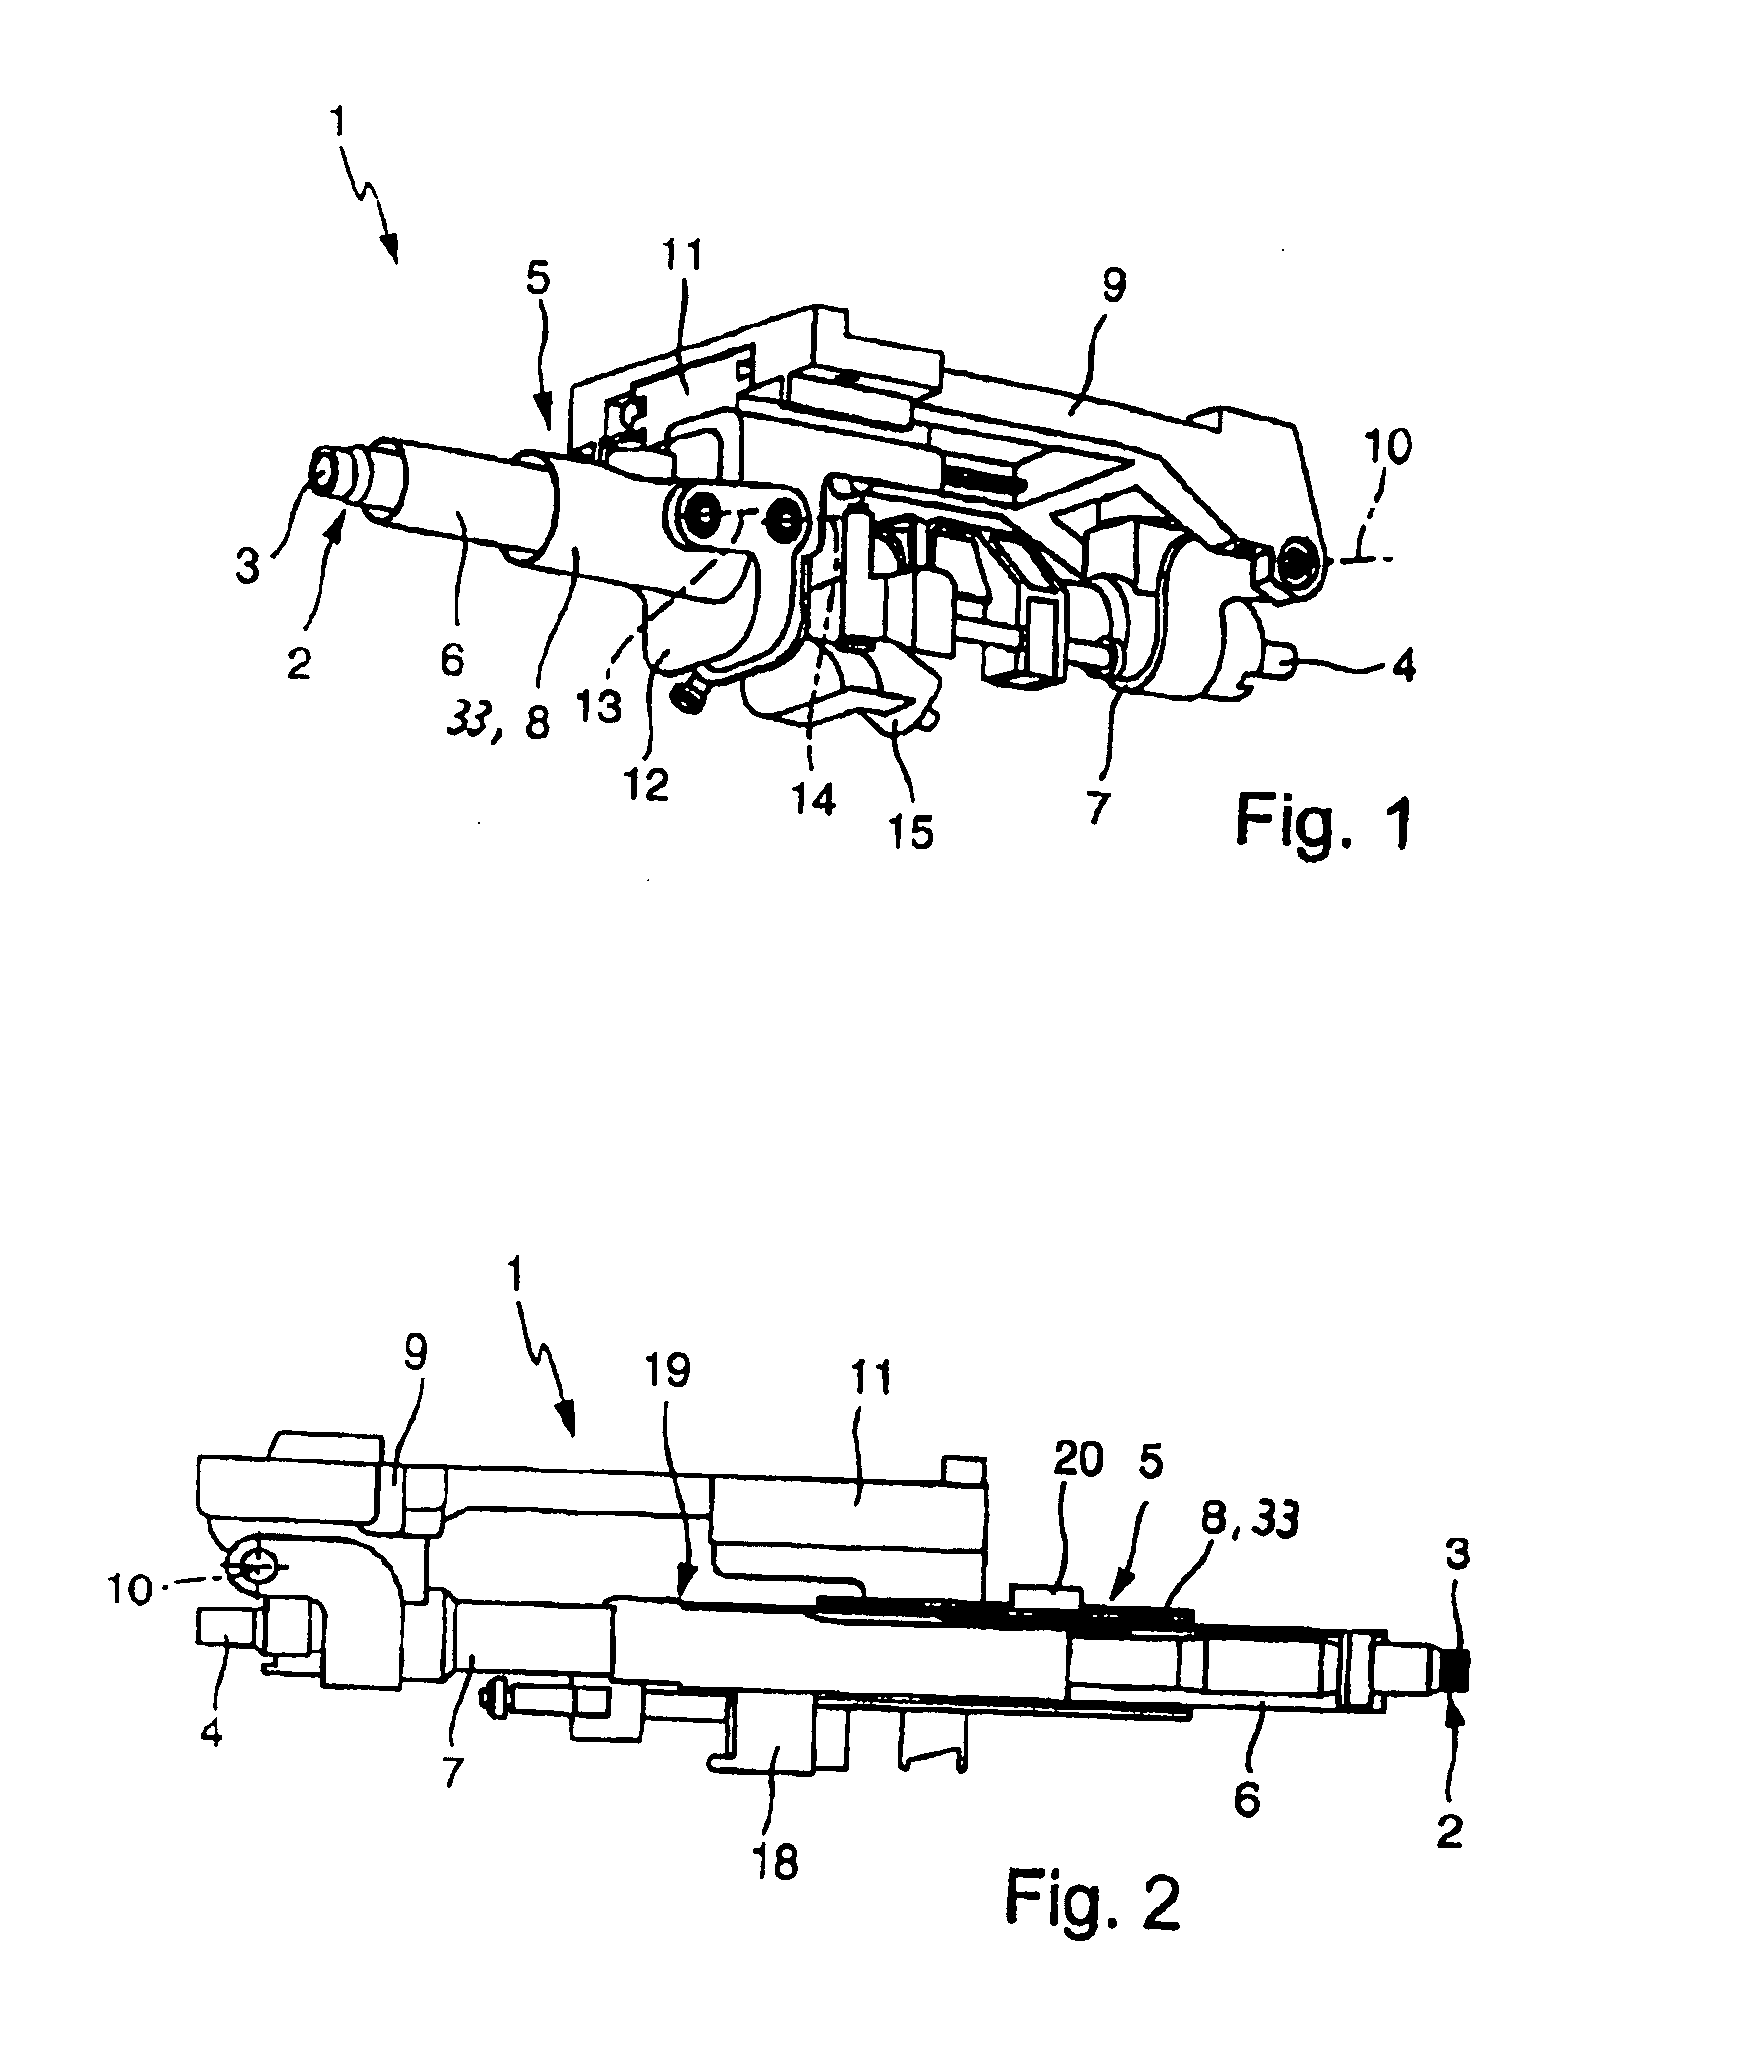 Safety Steering Column for a Motor Vehicle